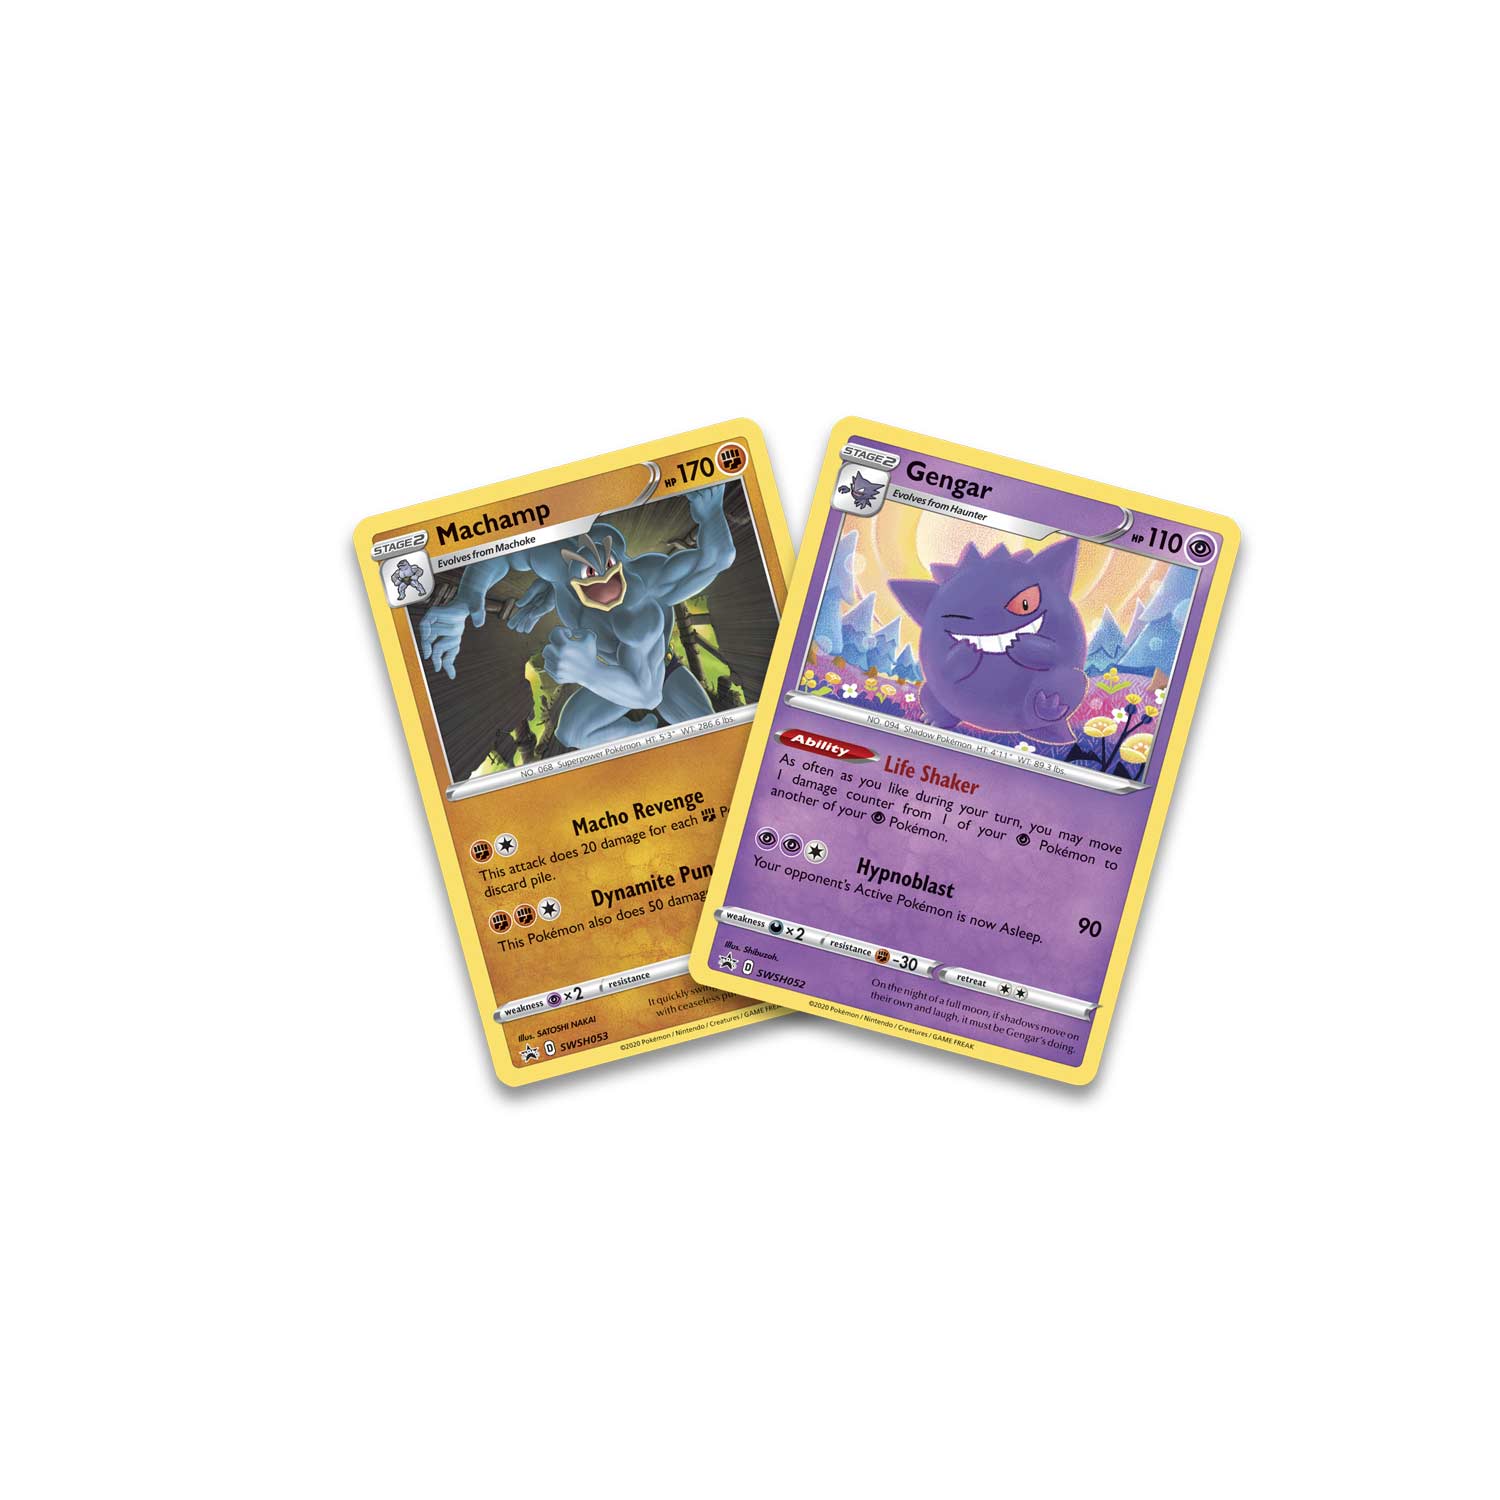 Pokémon TCG Champion's Path Special Pin Collection Game Cards for sale online 